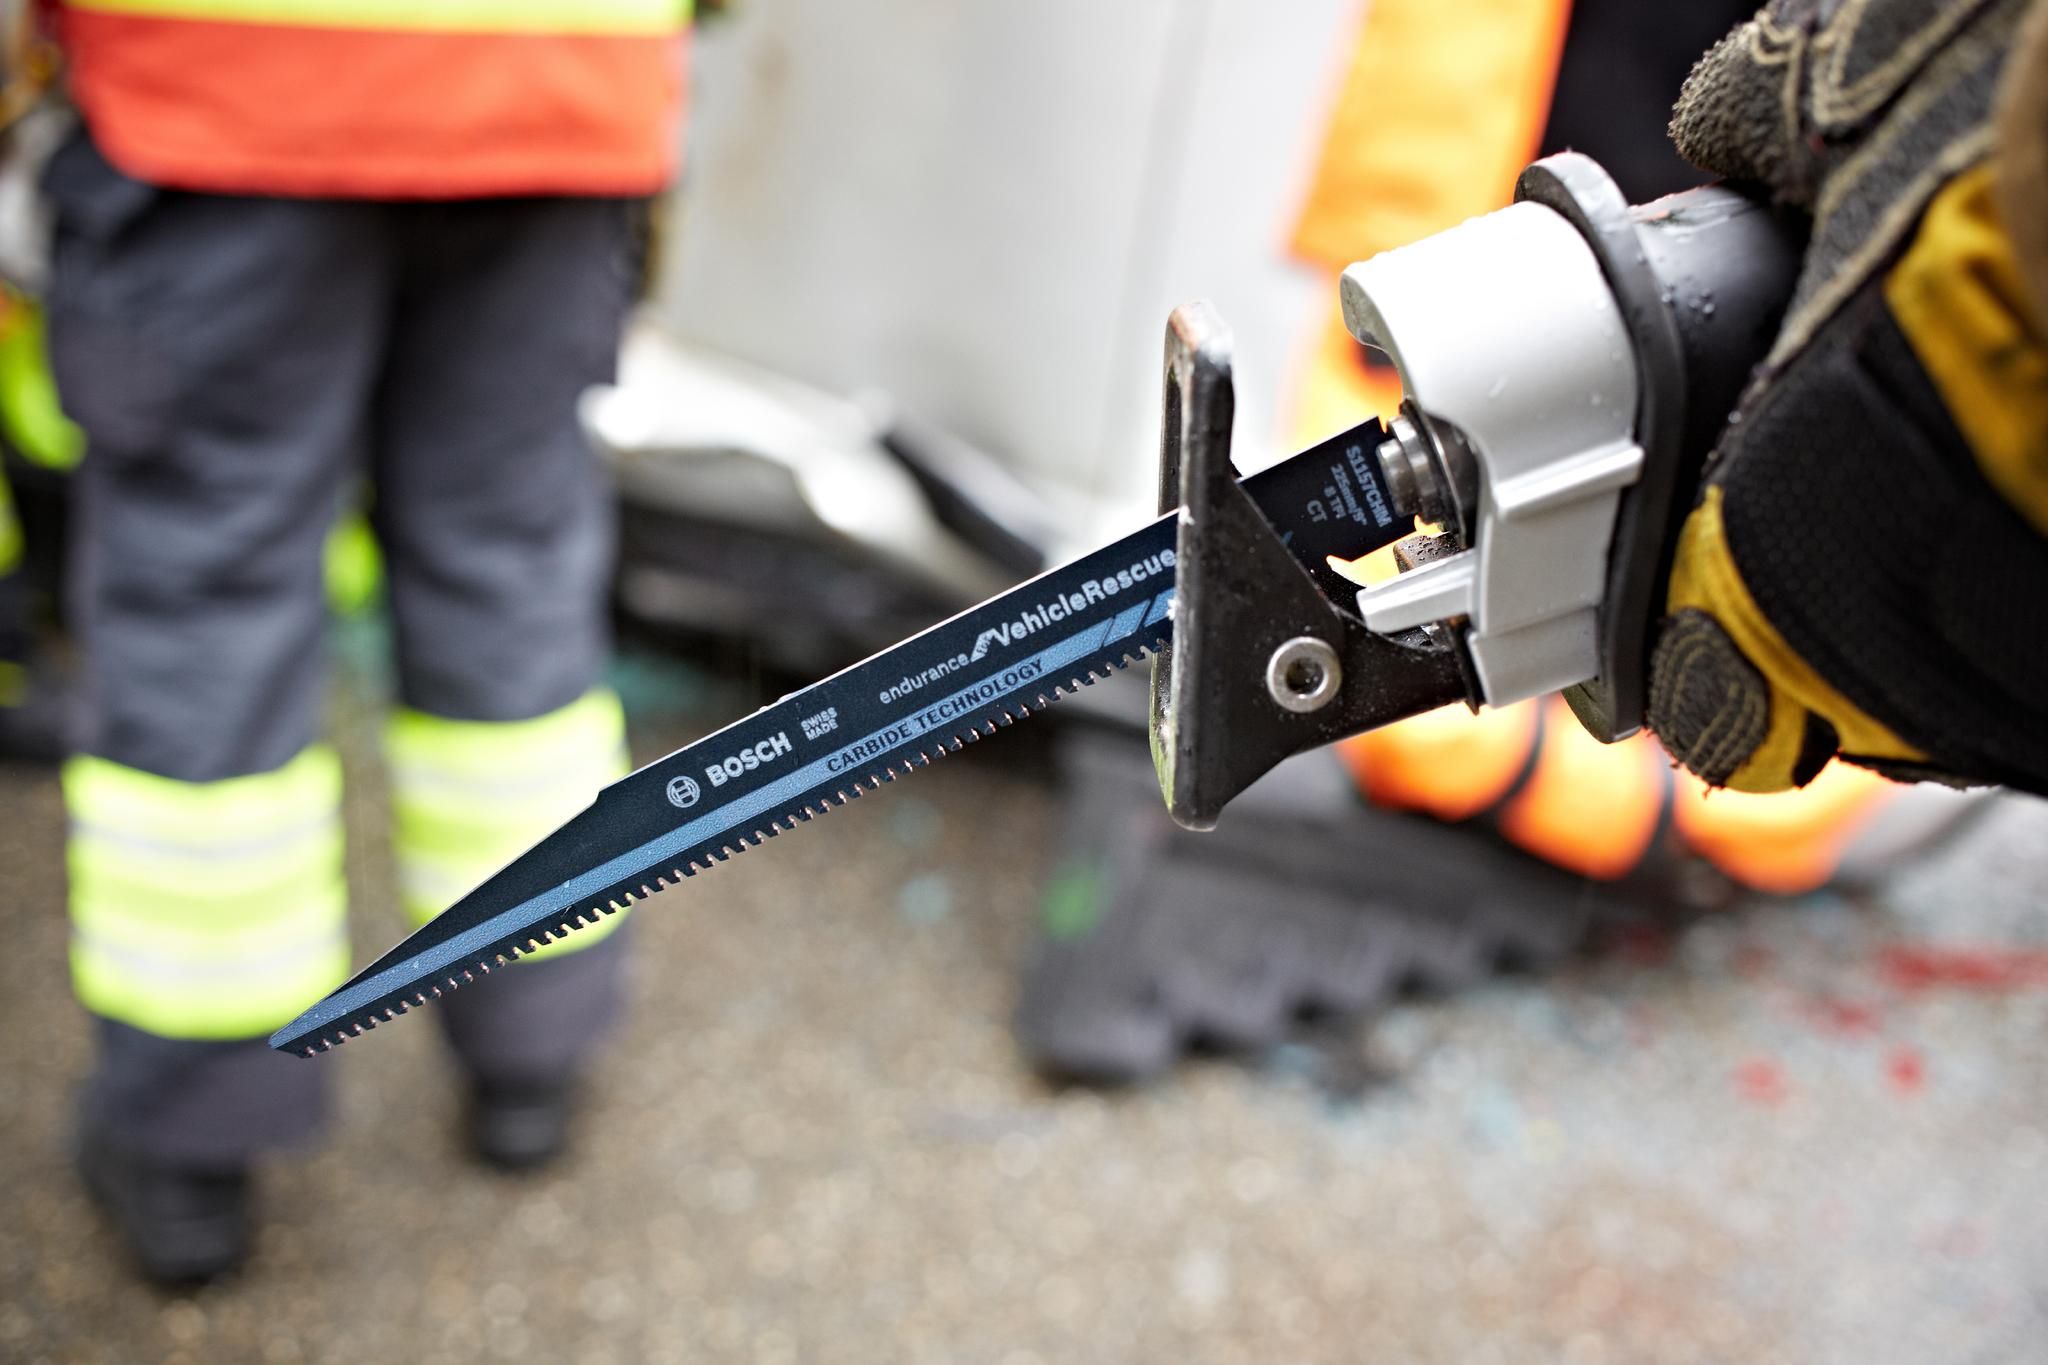 Blade cut in windscreens and glass: Endurance for Vehicle Rescue Carbide Blade